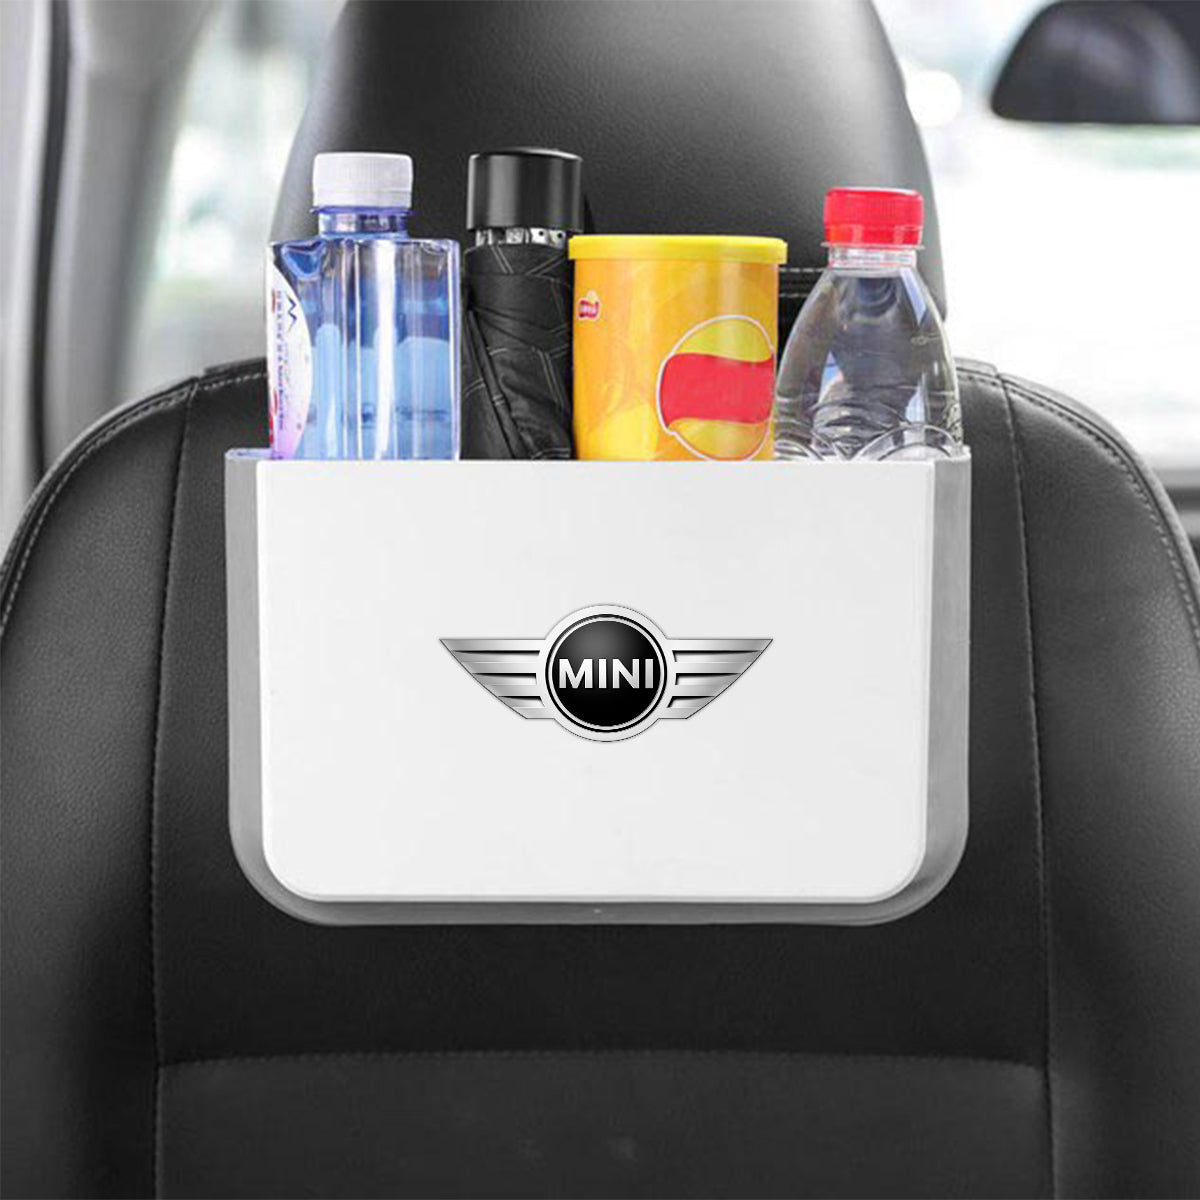 Hanging Waterproof Car Trash can-Foldable, Custom For Your Cars, Waterproof, and Equipped with Cup Holders and Trays. Multi-Purpose, Car Accessories MC11992